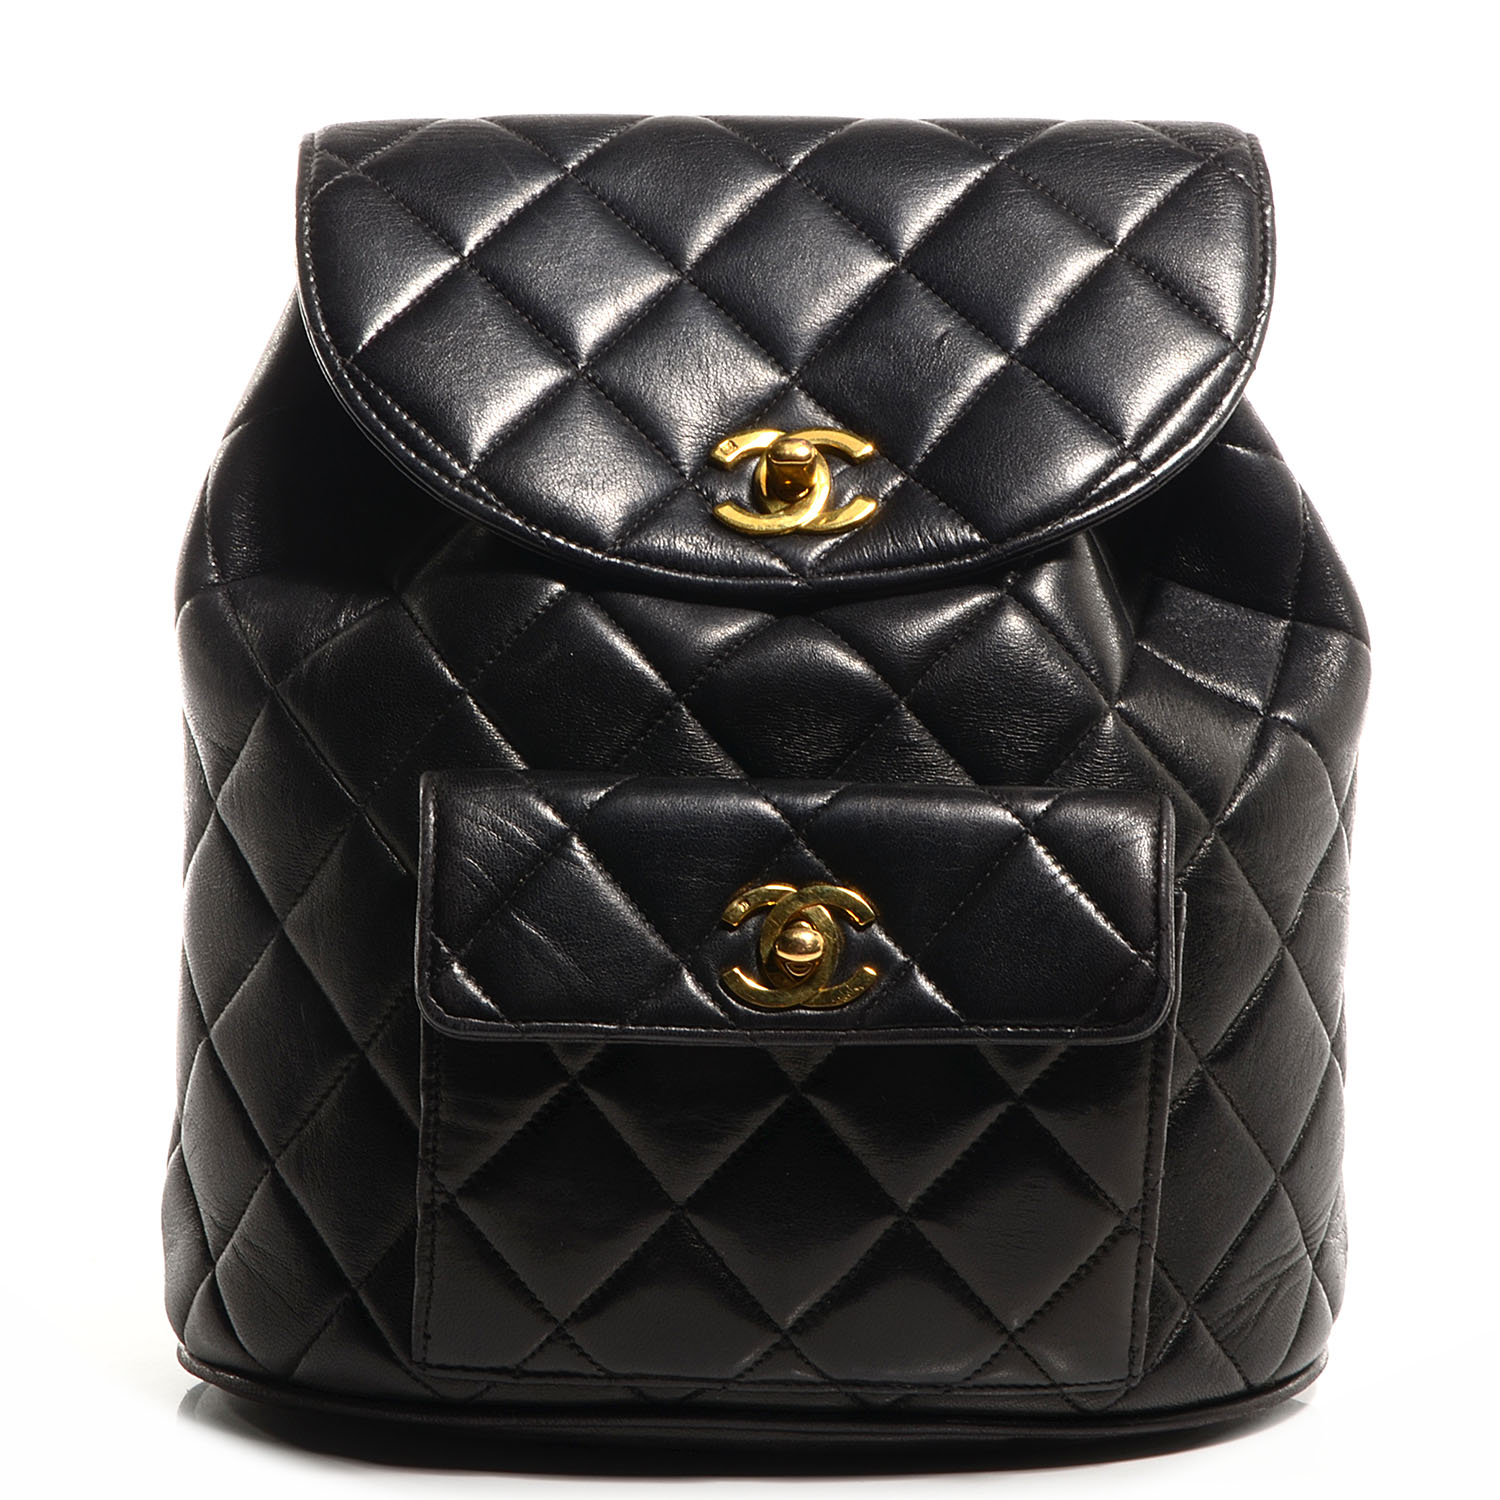 CHANEL Lambskin Quilted Backpack Black 75379